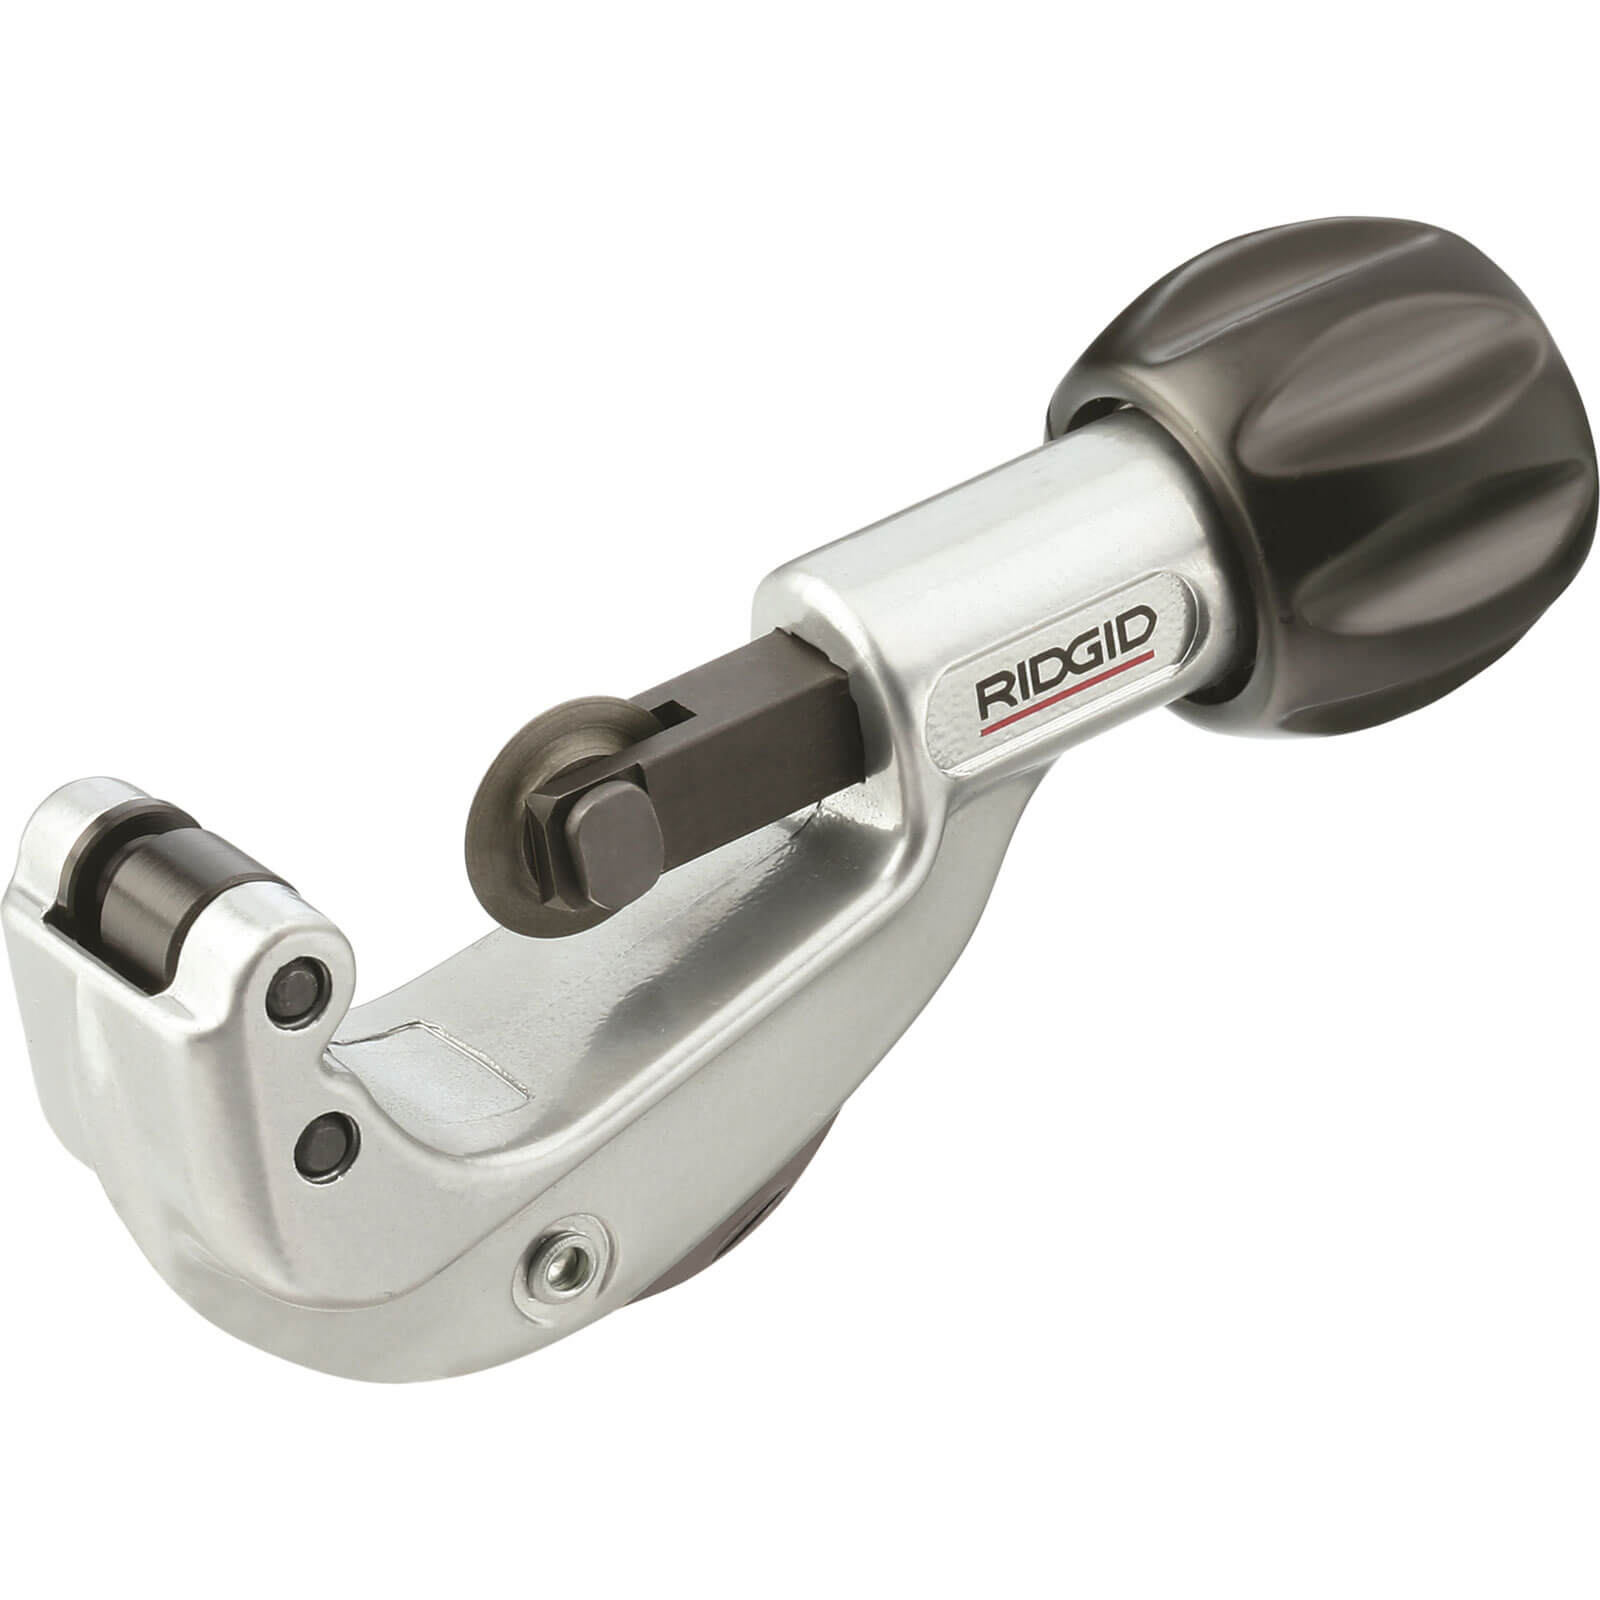 Image of Ridgid Constant Swing Copper Pipe Cutter 3mm - 35mm